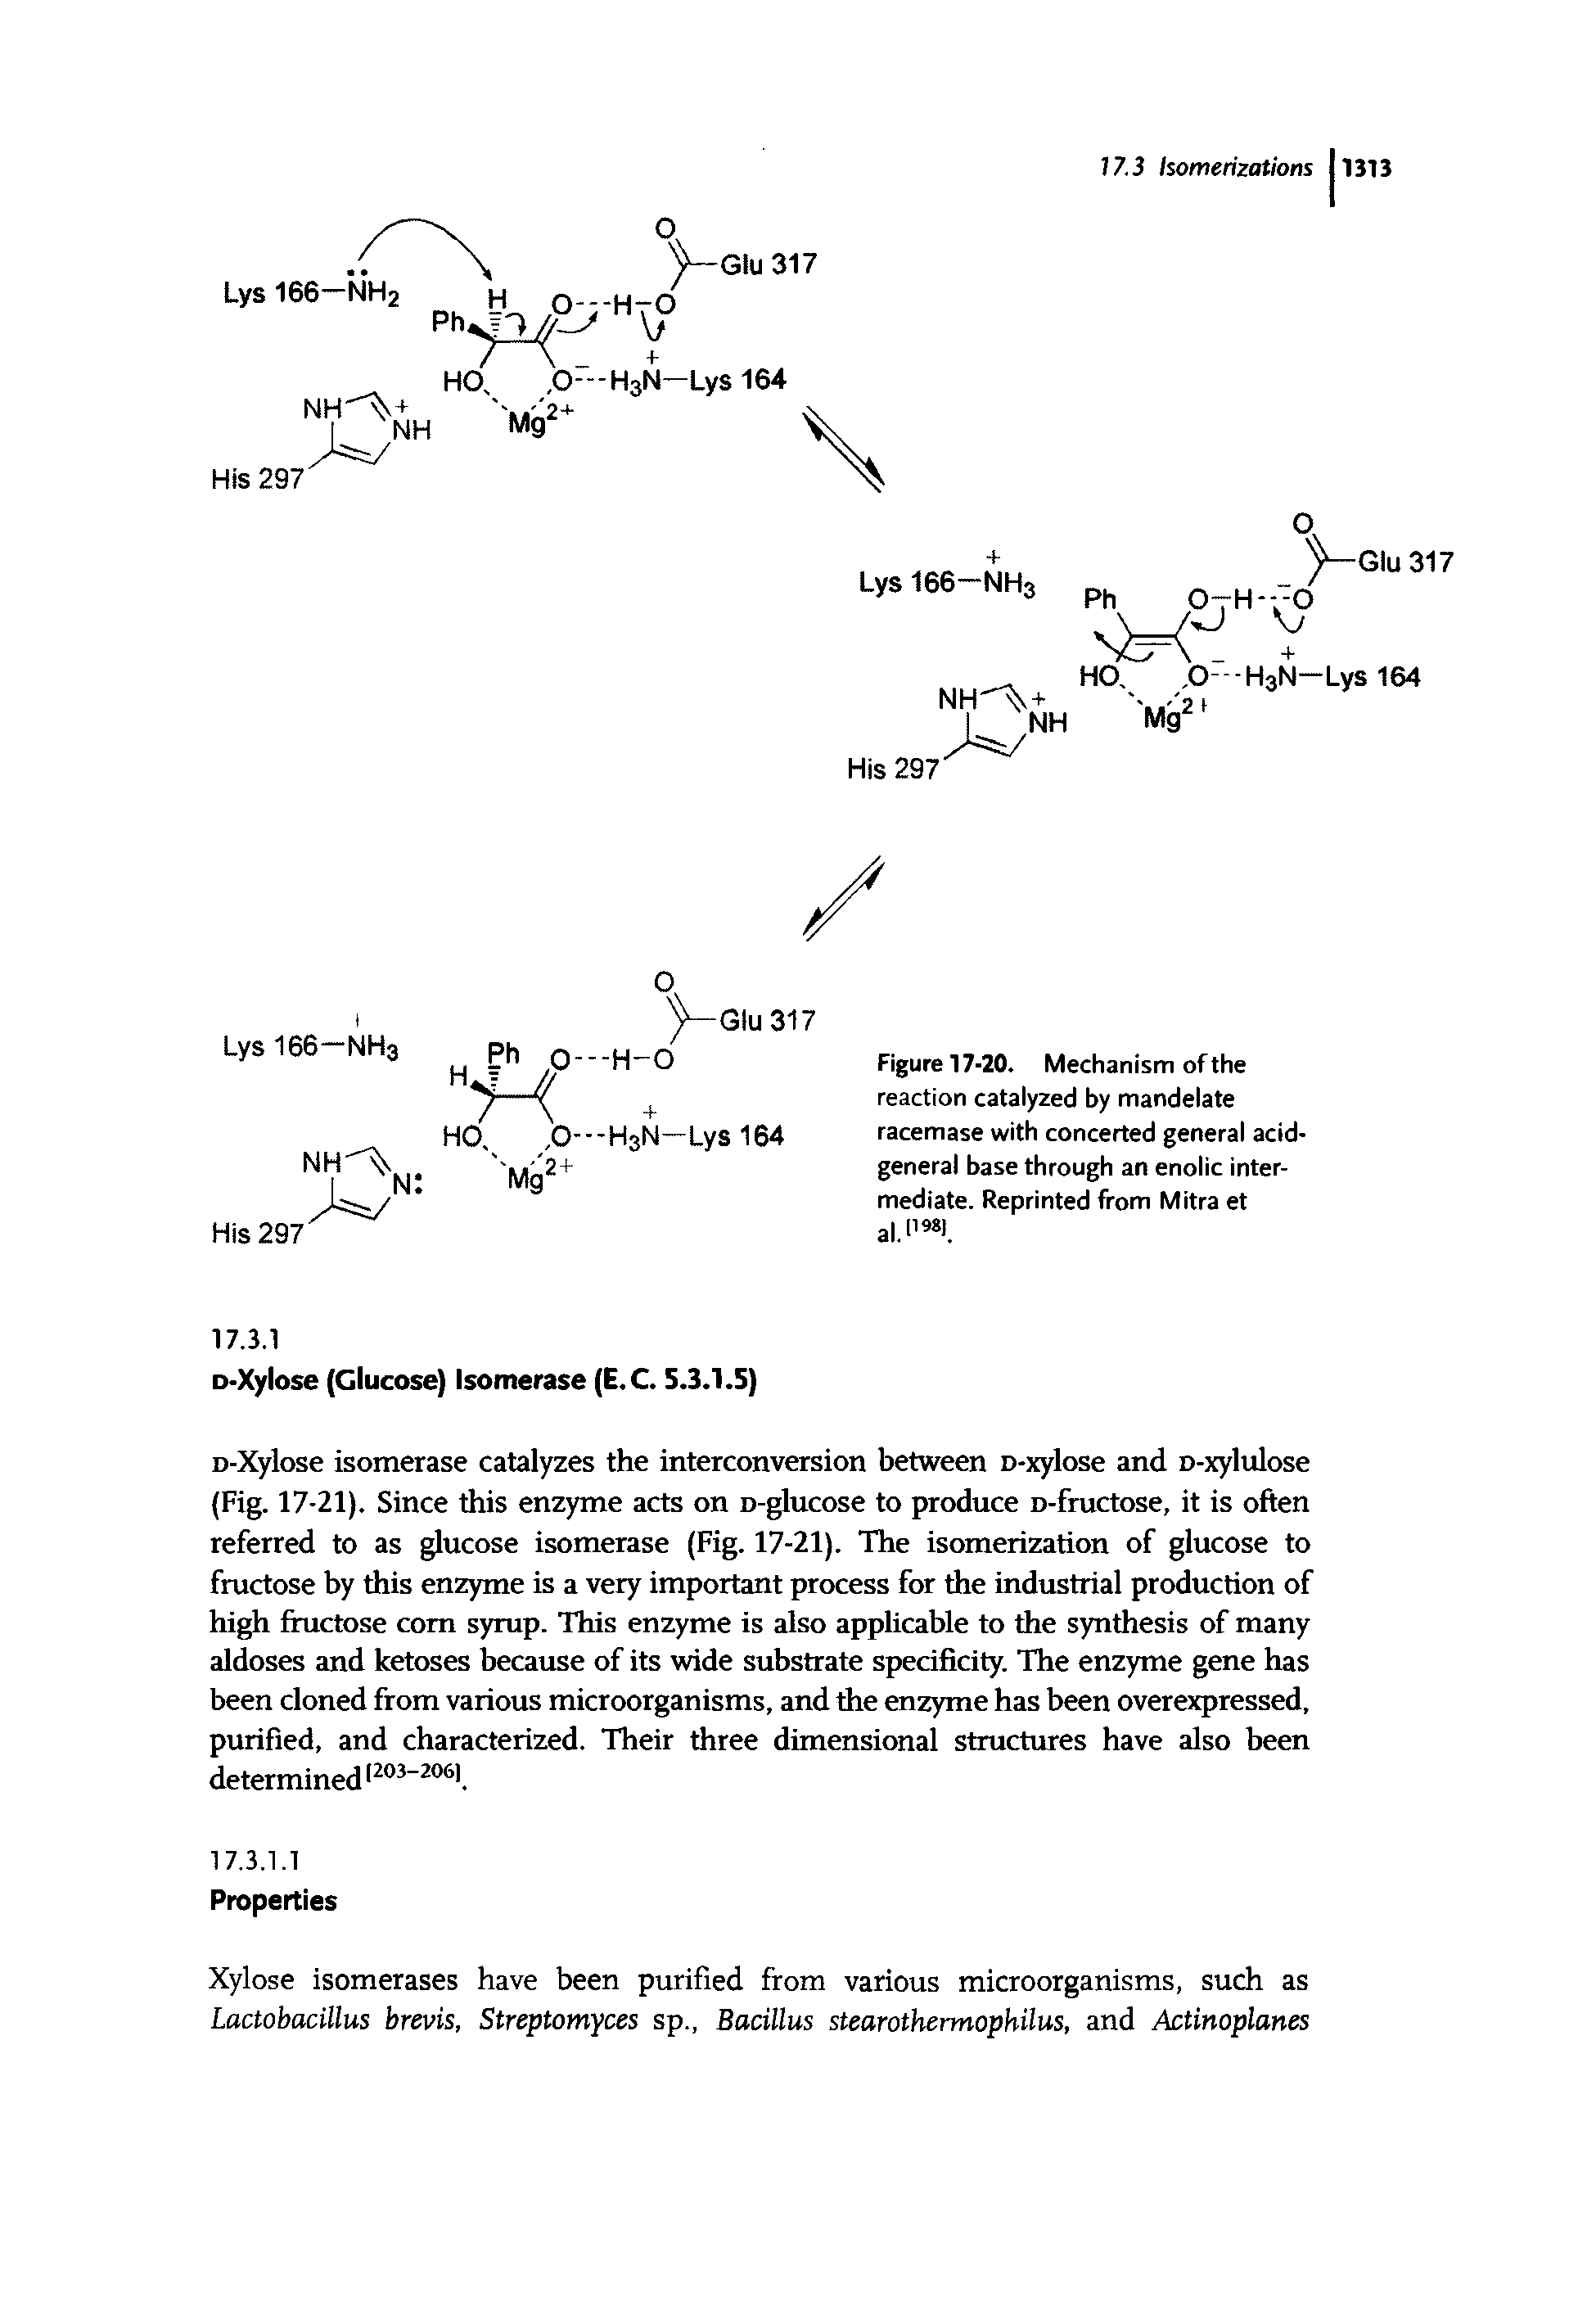 Figure 17-20. Mechanism of the reaction catalyzed by mandelate racemase with concerted general acid-general base through an enolic intermediate. Reprinted from Mitra et al. 1981.